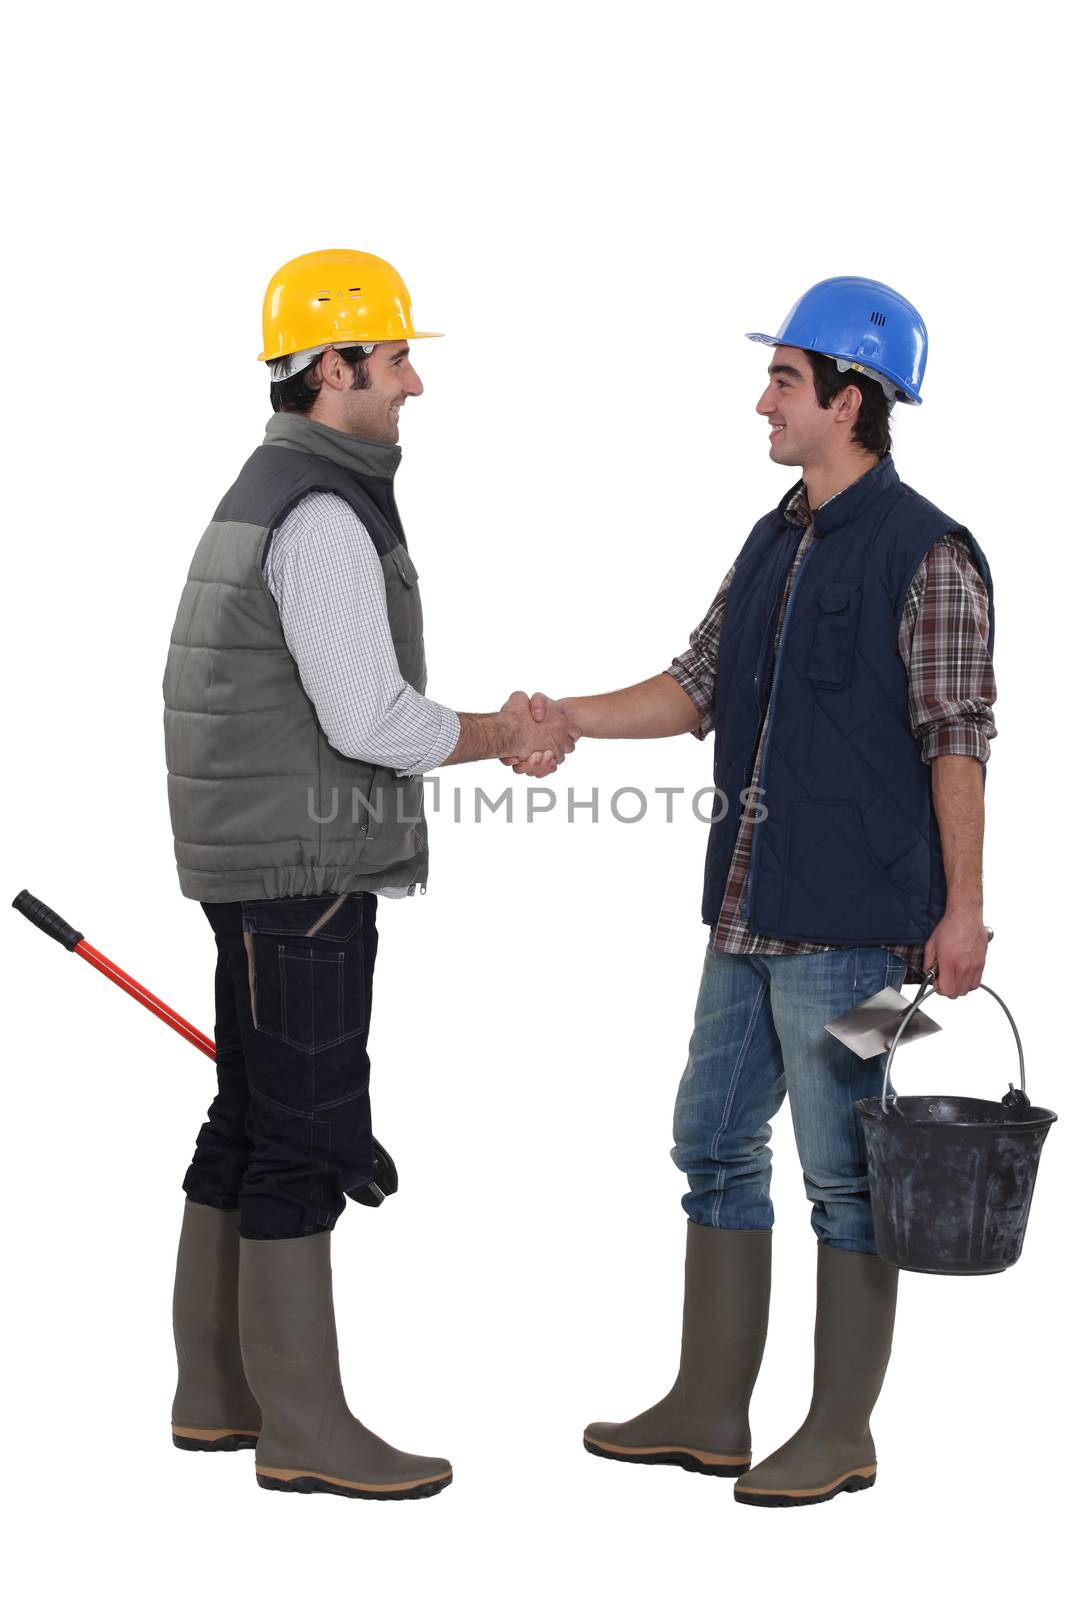 Construction workers shaking hands